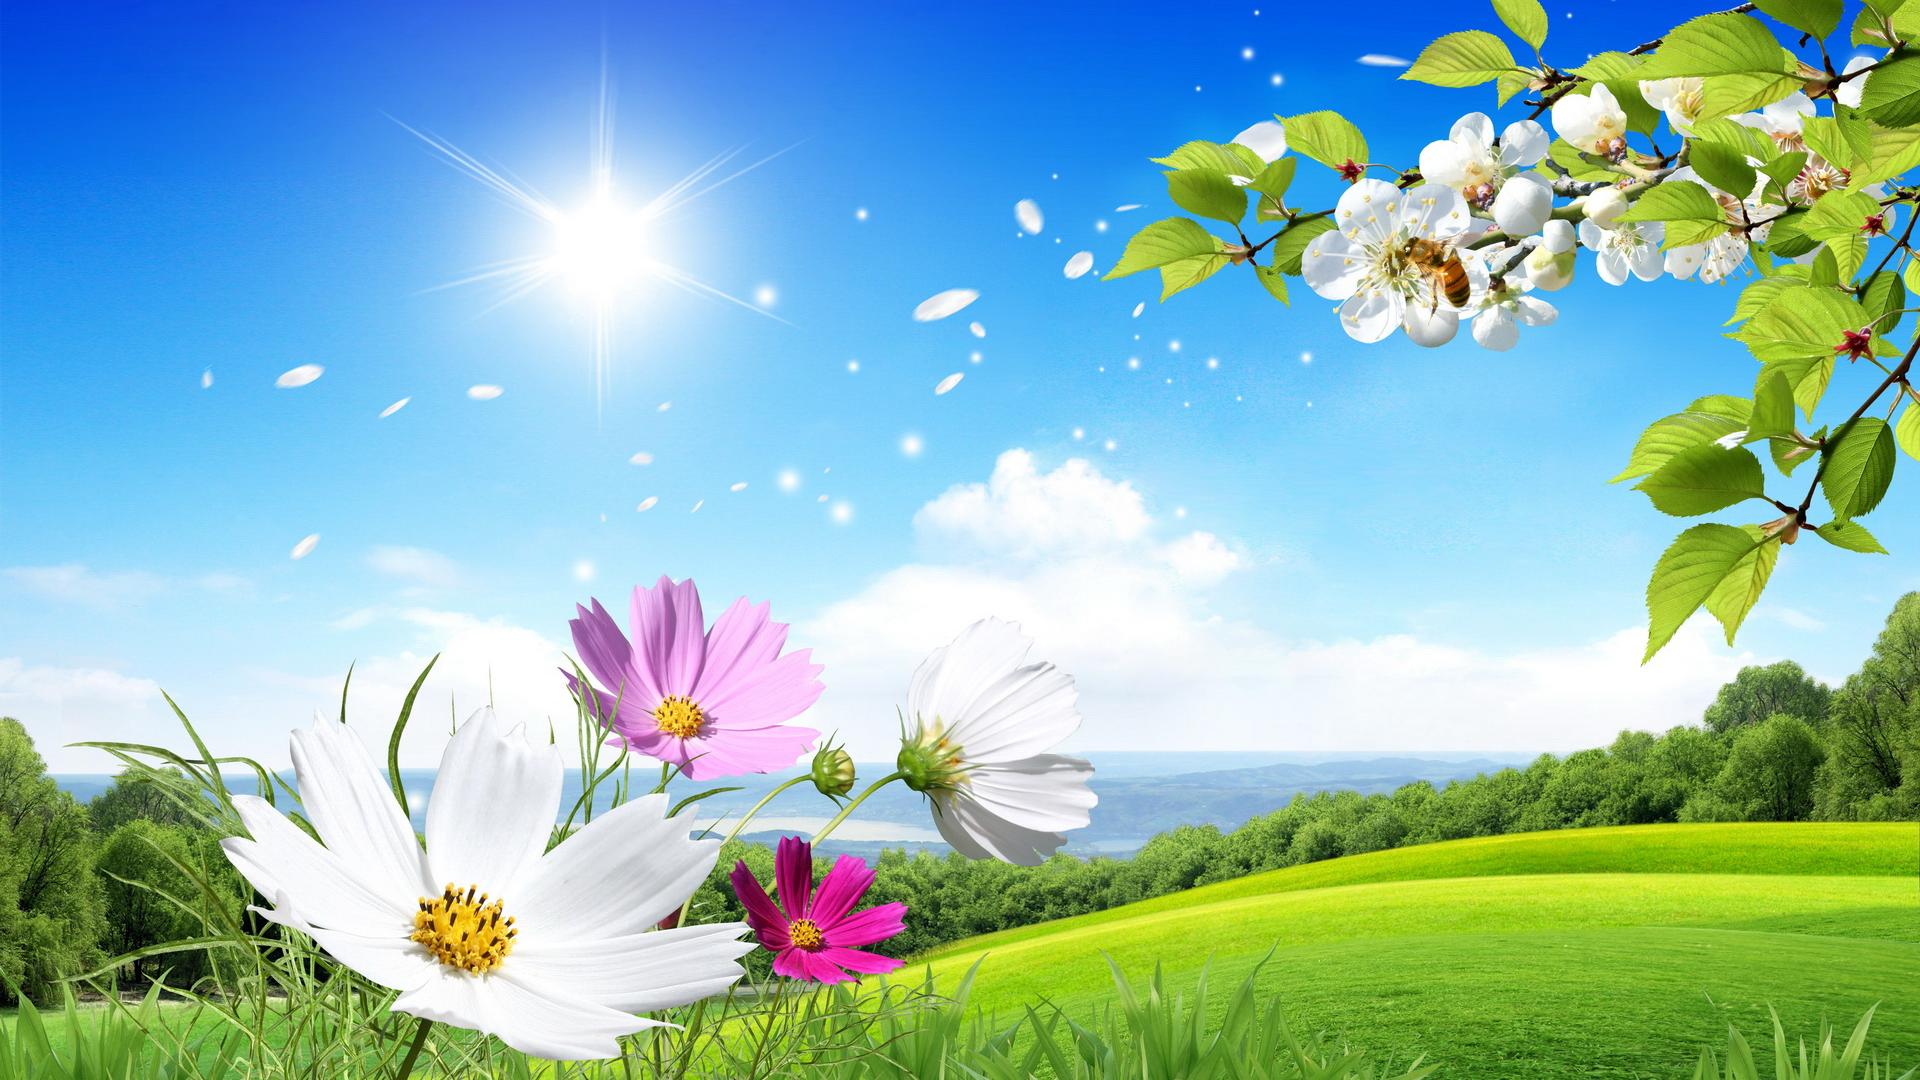 Beautiful Summer And Flowers Scenery Wallpaper